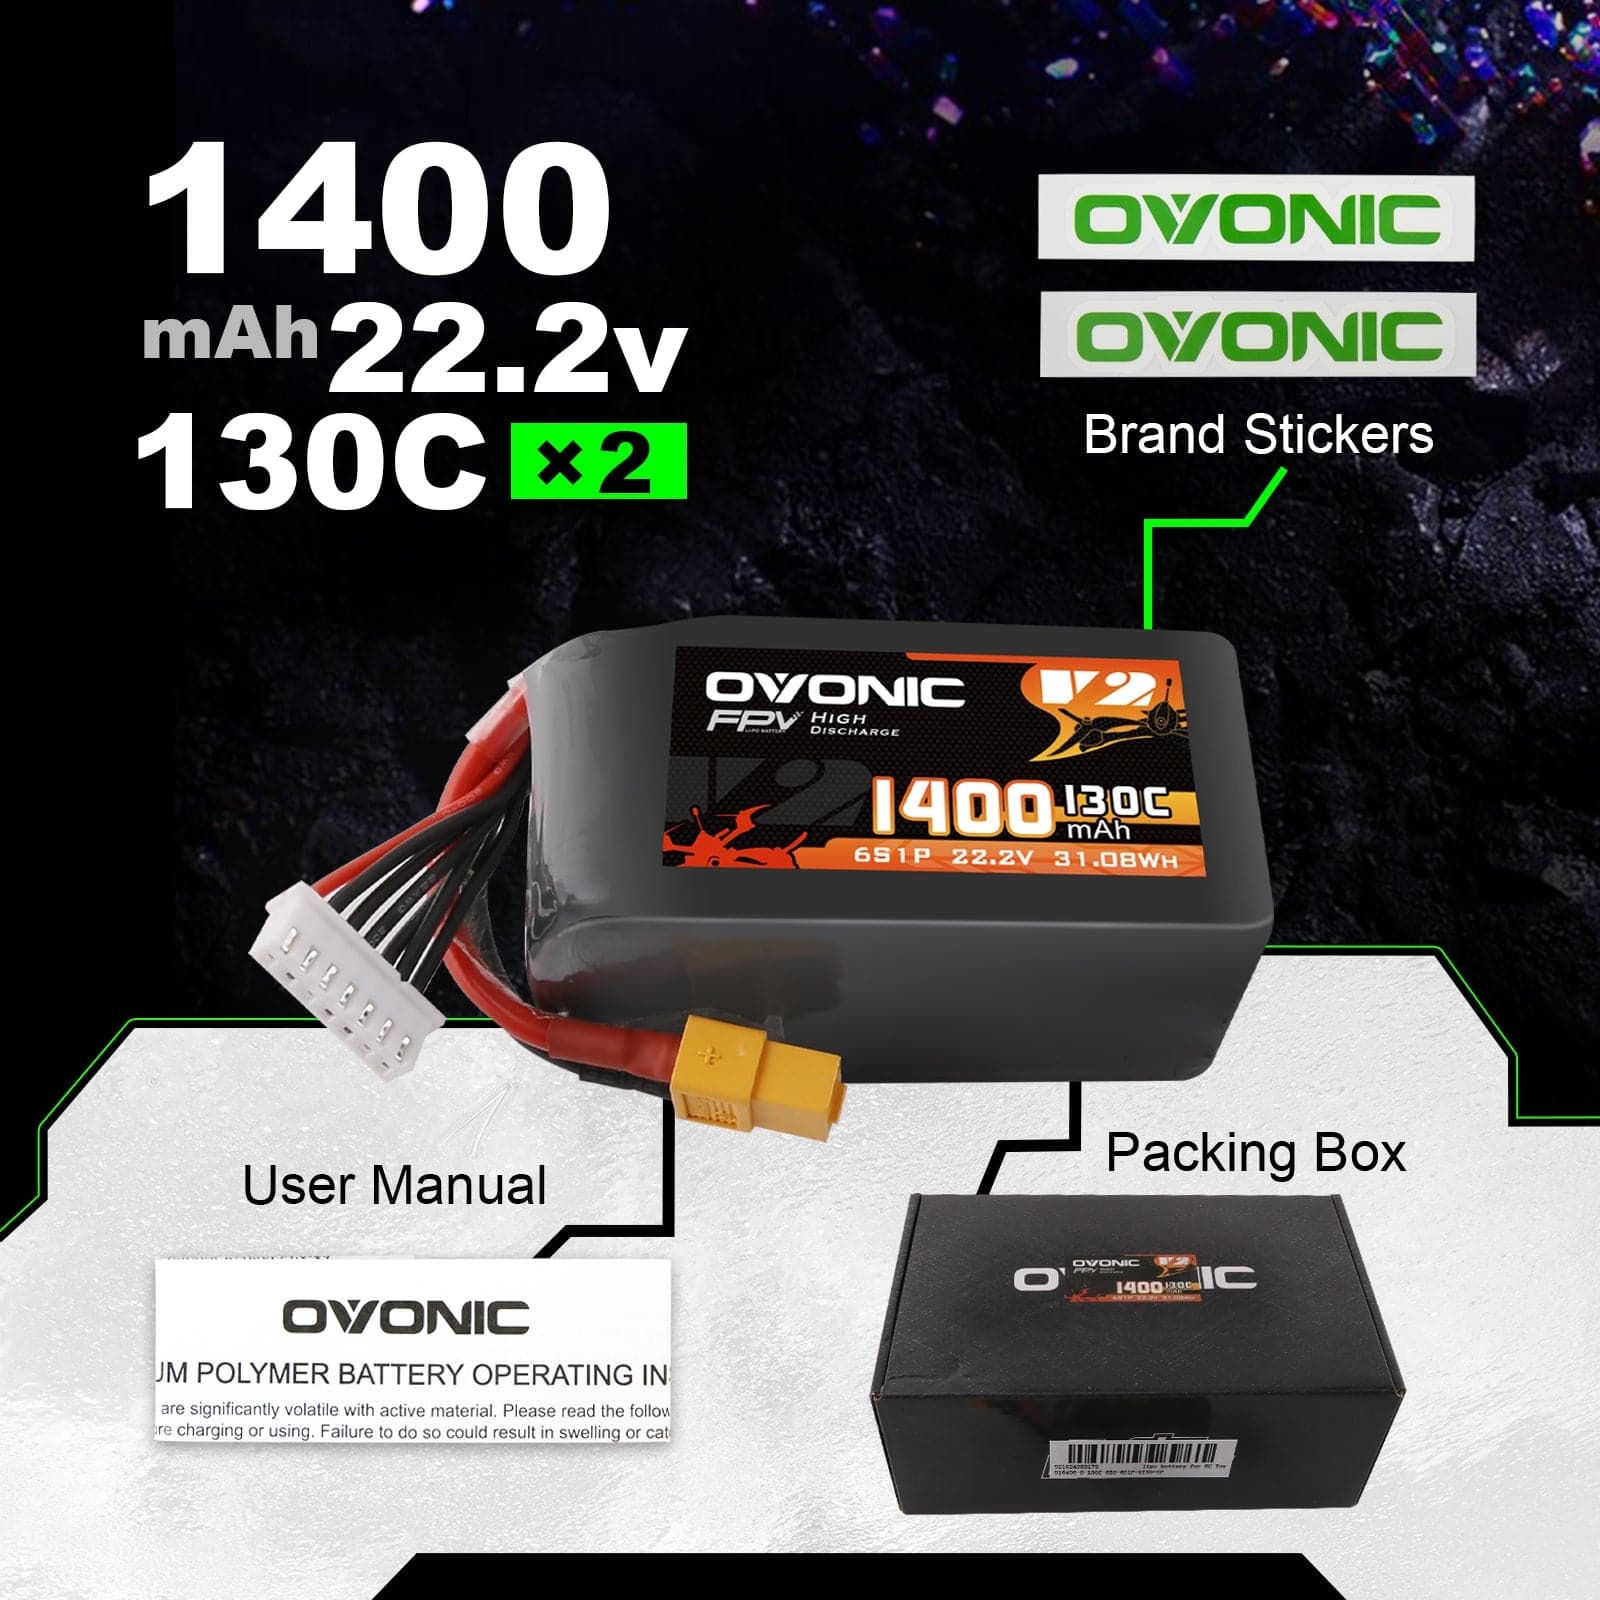 2x Ovonic 130C 6S 1400mah Lipo Battery 22.2V Pack with XT60 Plug for RC airplane